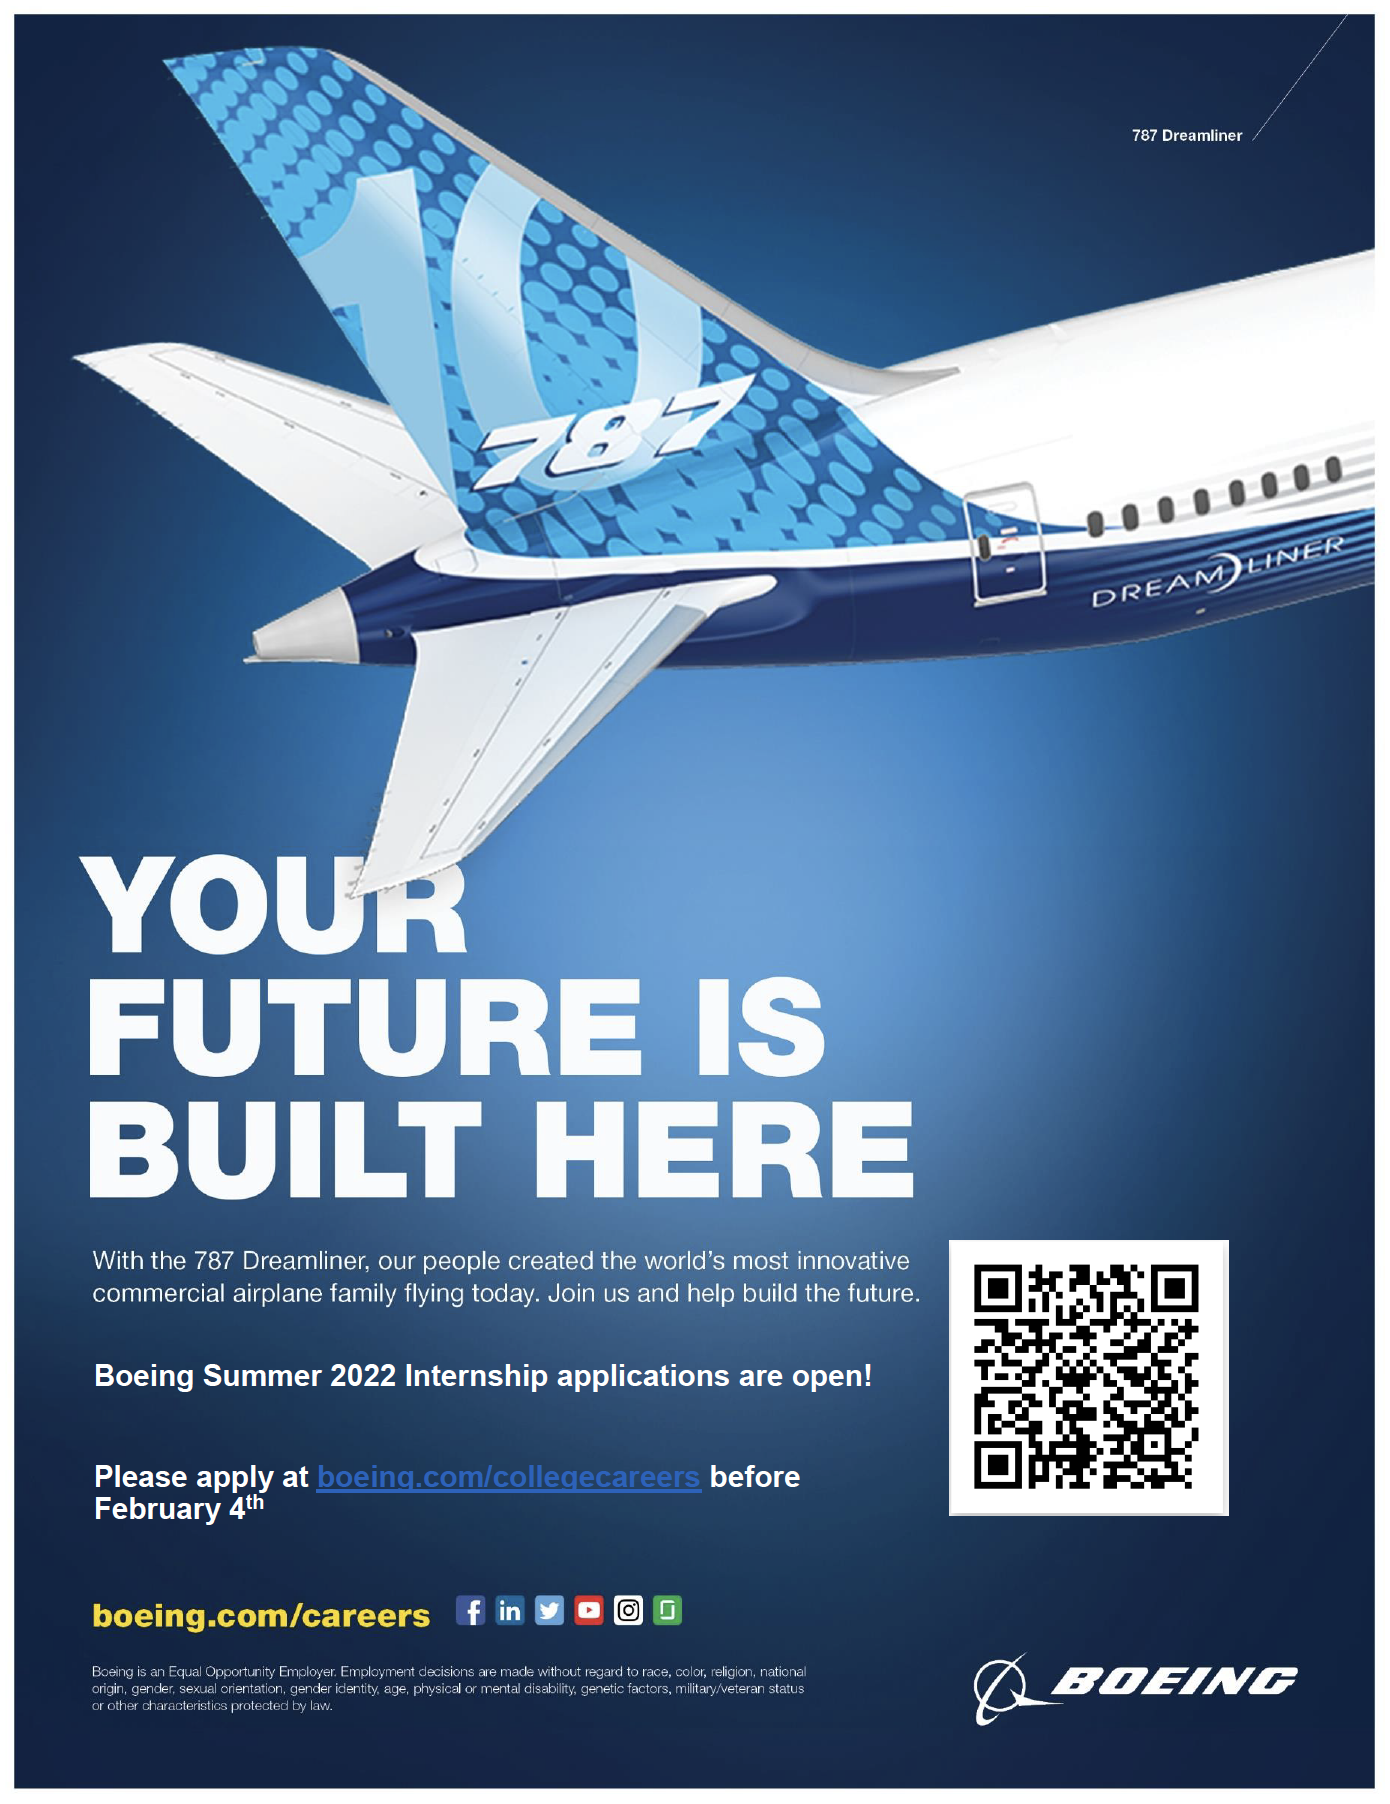 Apply for summer internships with Boeing Announce University of